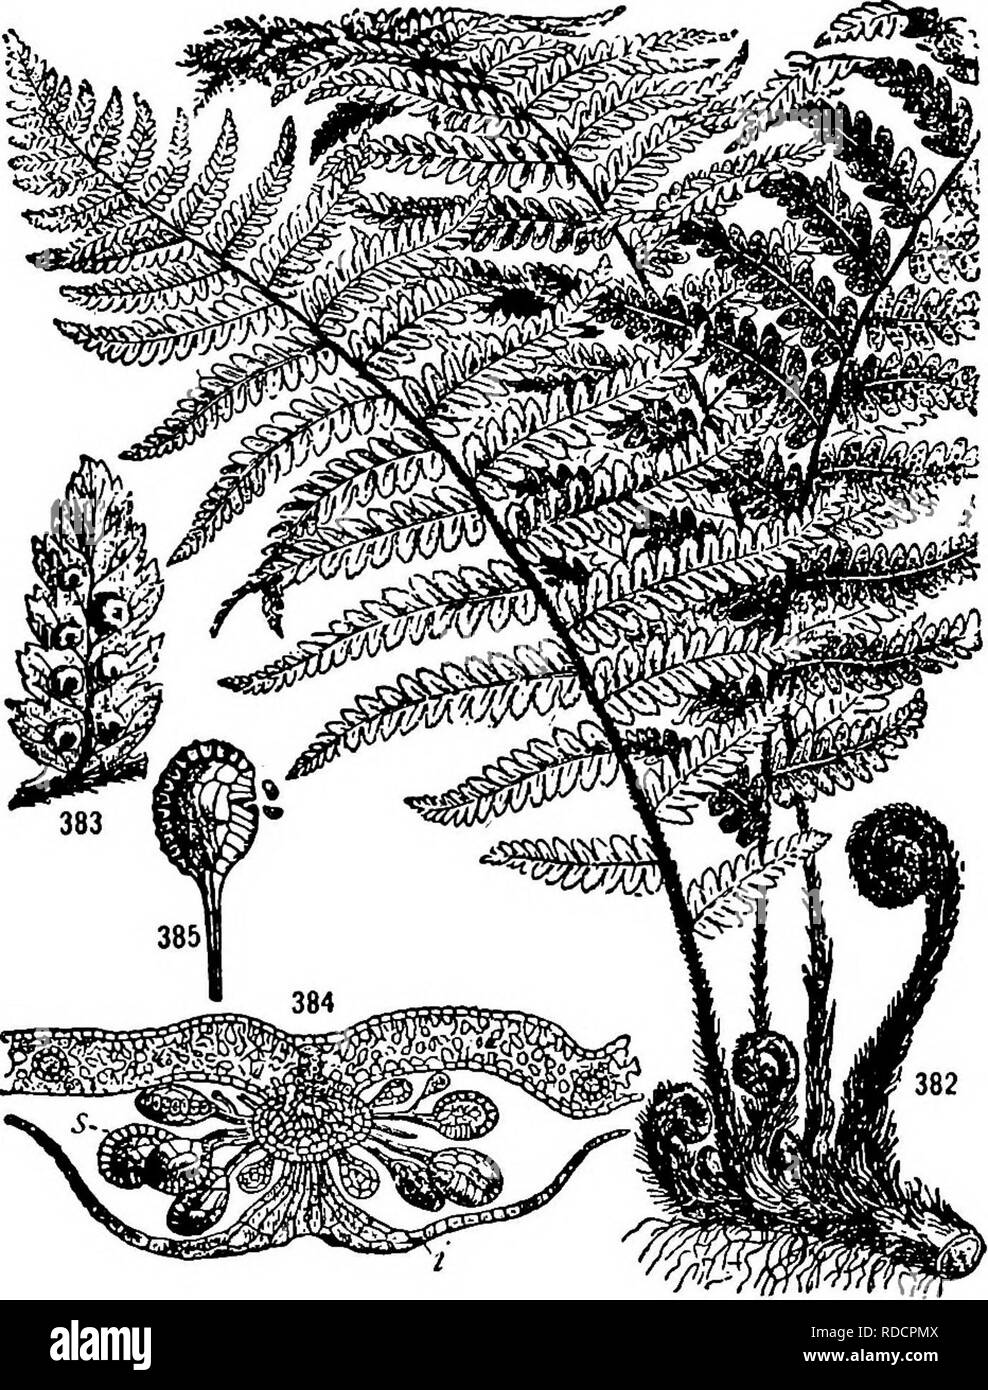 . Heredity in relation to evolution and animal breeding, . Heredity. THE DUALITY OF INHERITANCE. Fig. 6. — An ordinary fern, which reproduces by asexual spores. The fern is shown reduced in size at 382; a portion of a frond seen from below and slightly enlarged, at 383; a cross-section of the same more highly magnified, at 384. Notice in 384 the sporangia, and in 385 one of these dis- charging spores. (After Wossidlo, from Coulter Barnes and Cowle's Textbook of Botany.) 3 01. Please note that these images are extracted from scanned page images that may have been digitally enhanced for readabil Stock Photo